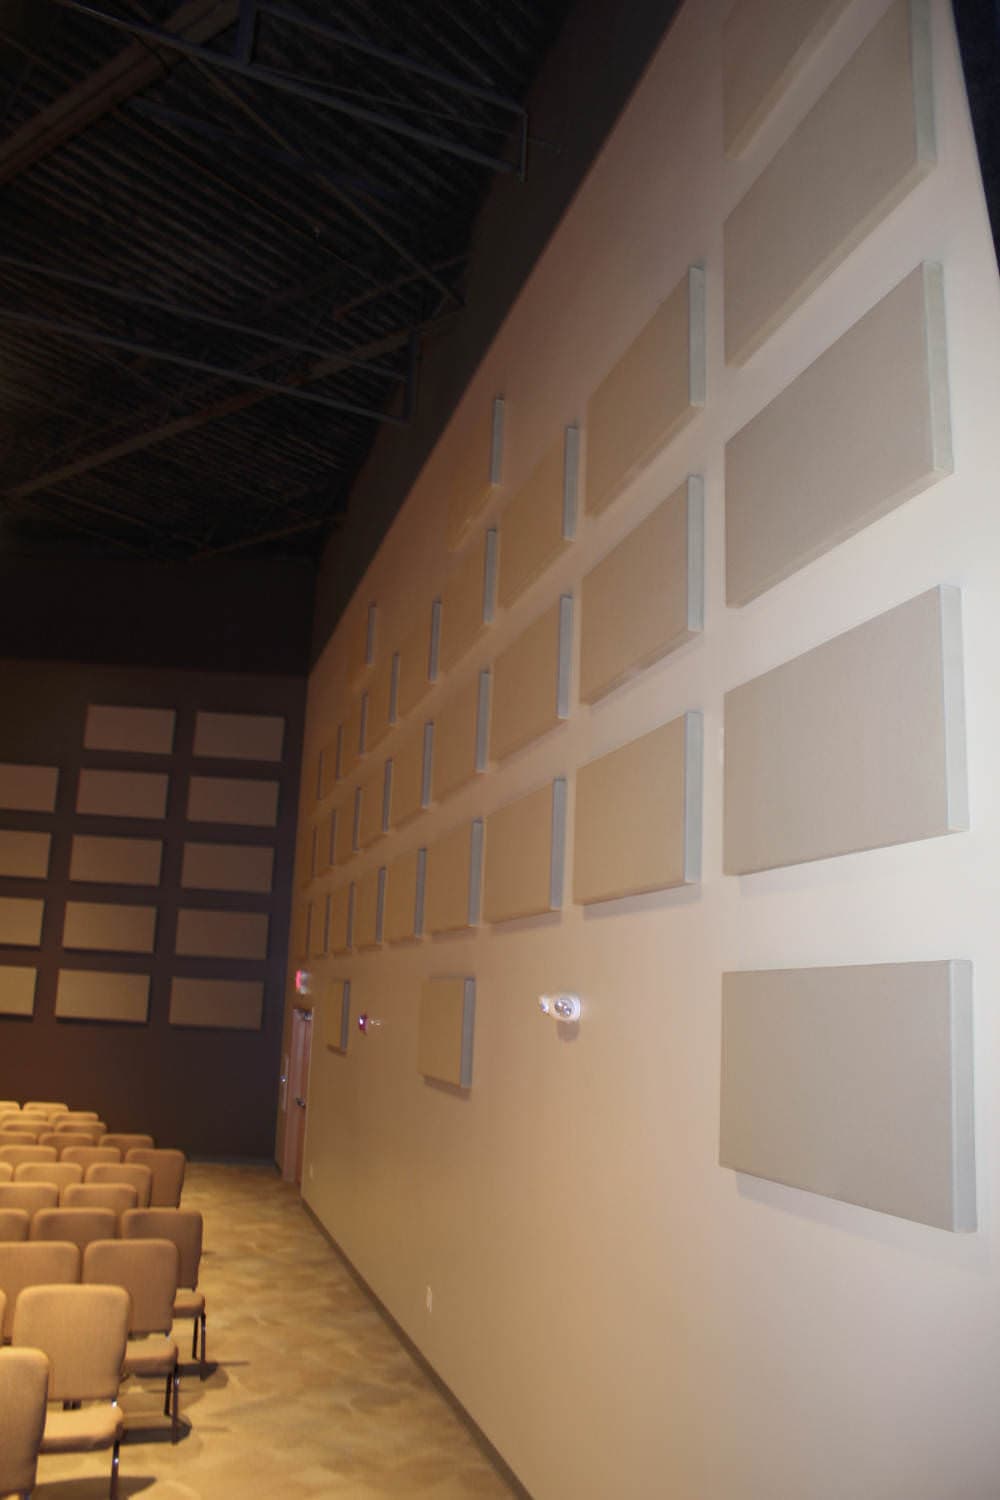 Standard Series acoustic panels in church